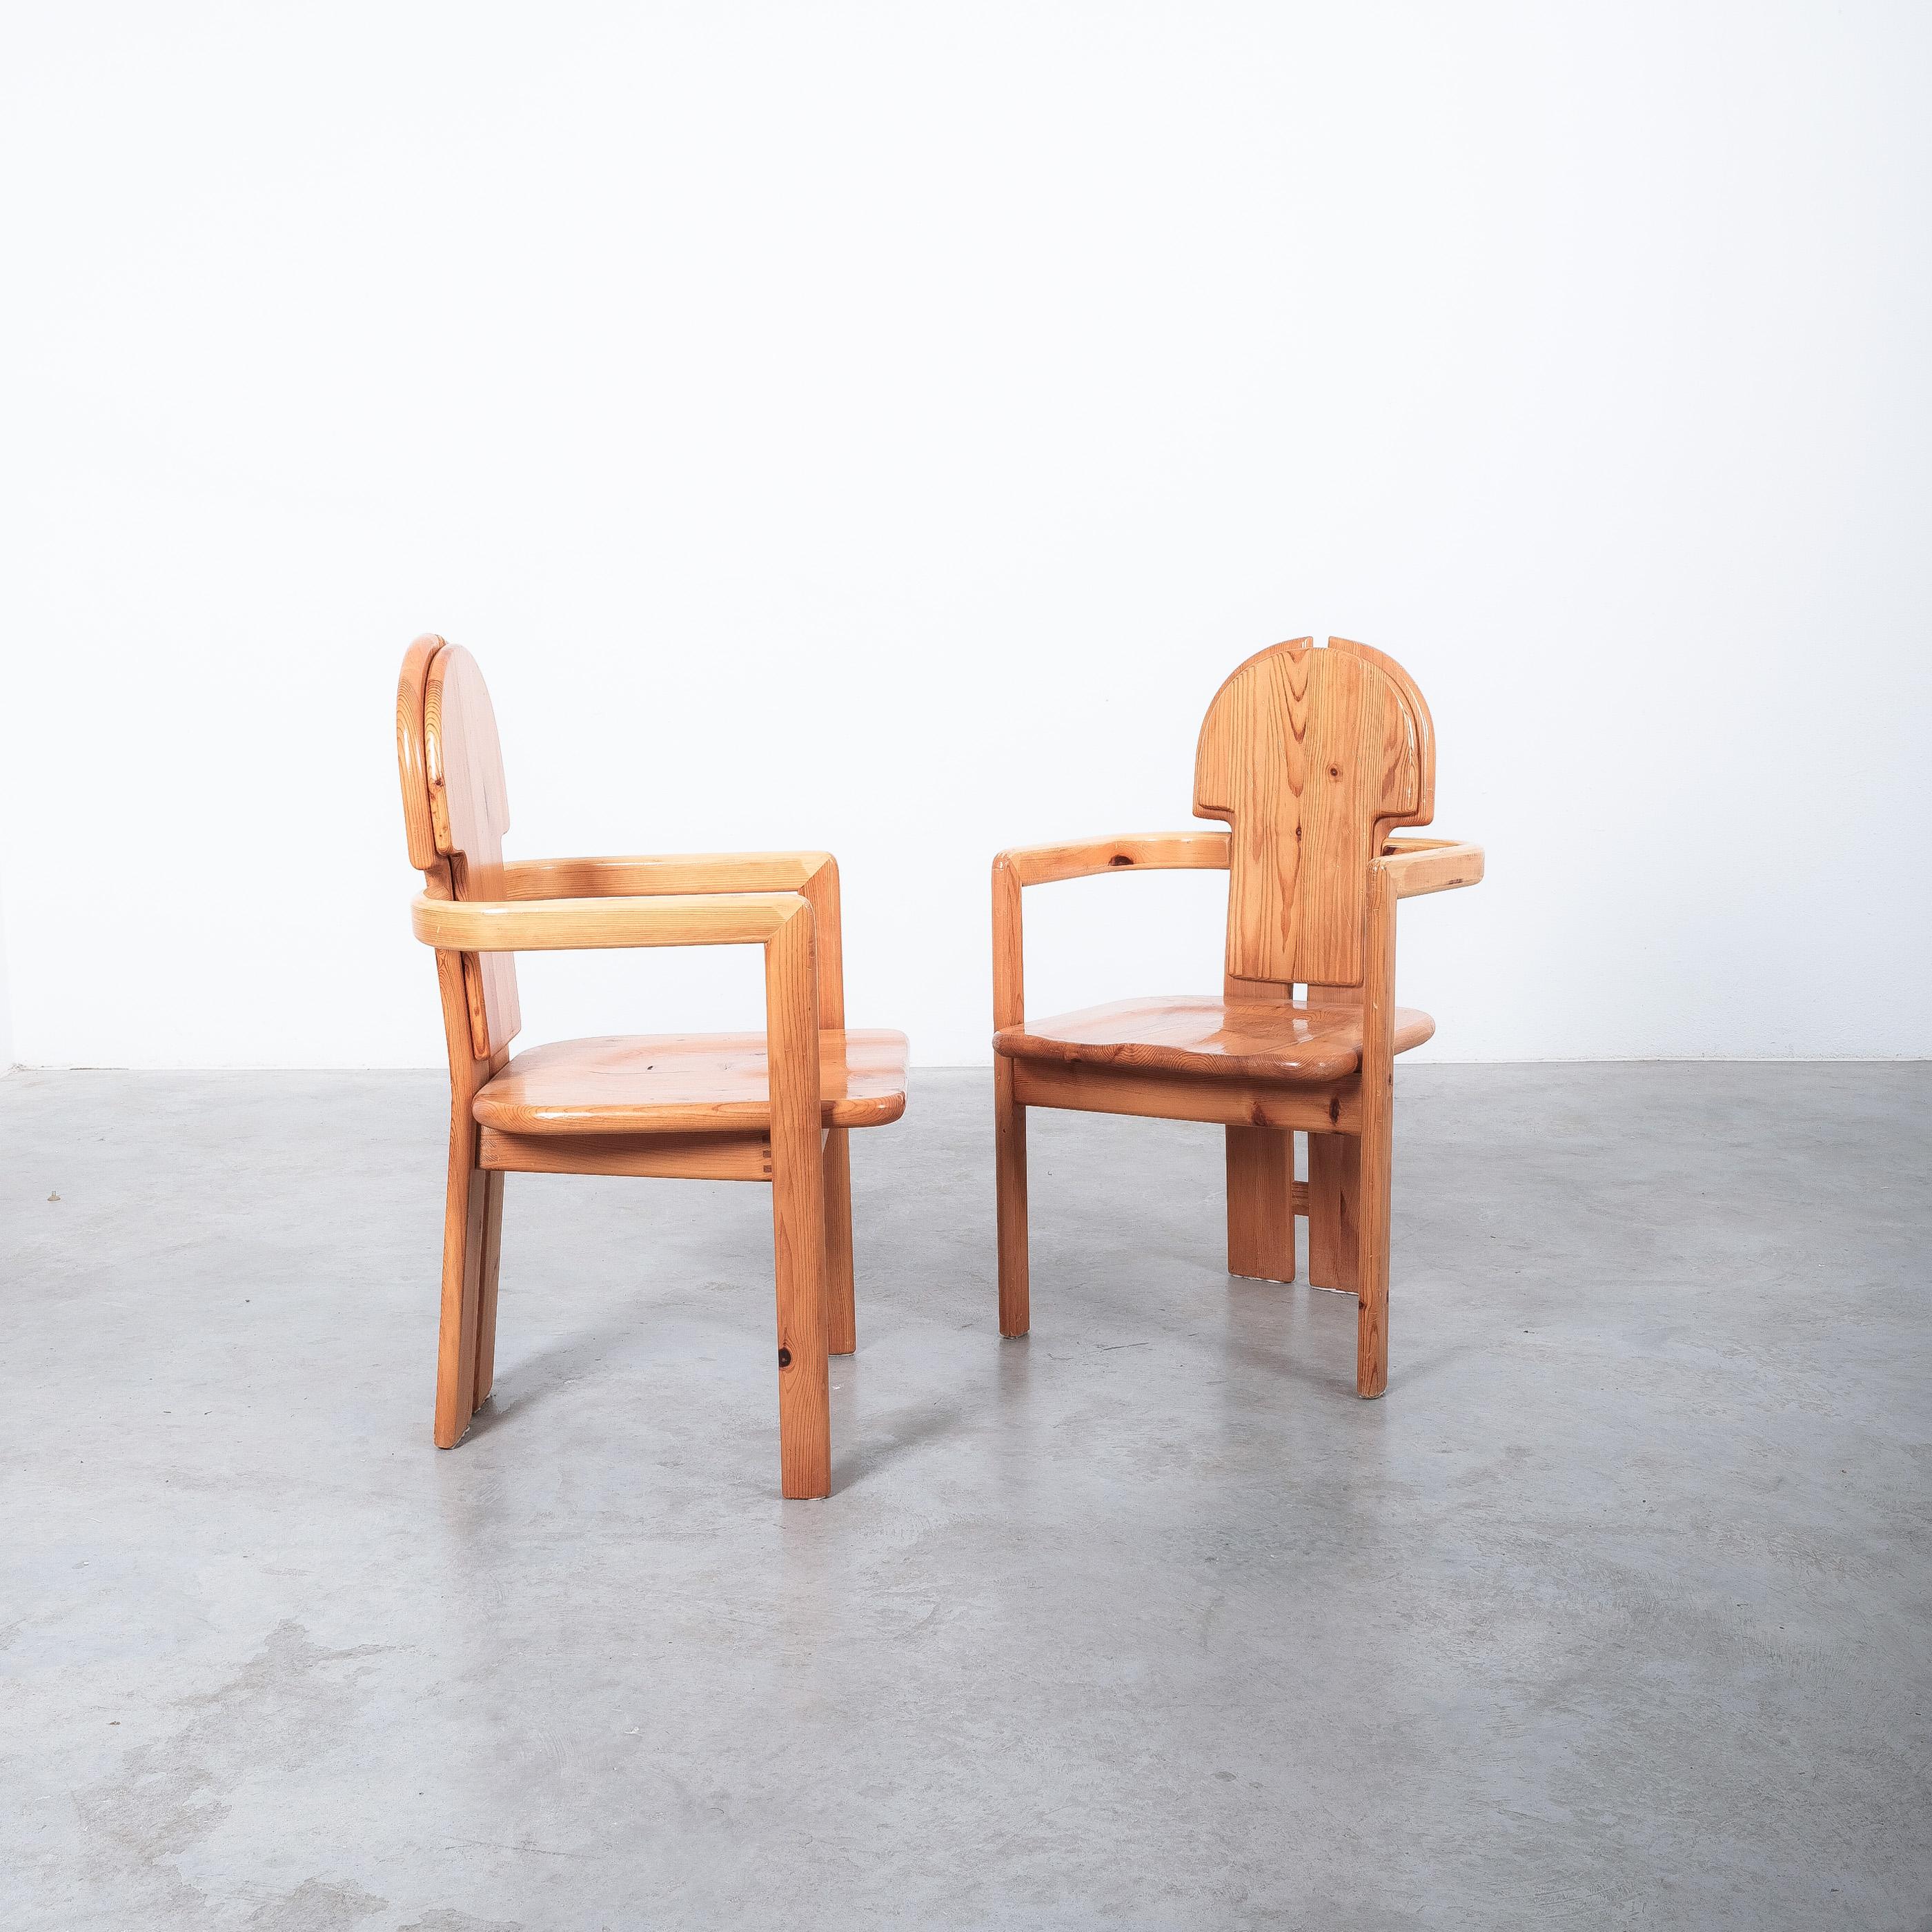 Rainer Daumiller Solid Pine Wood Dining Chairs '2' Danish Design, 1970 For Sale 3